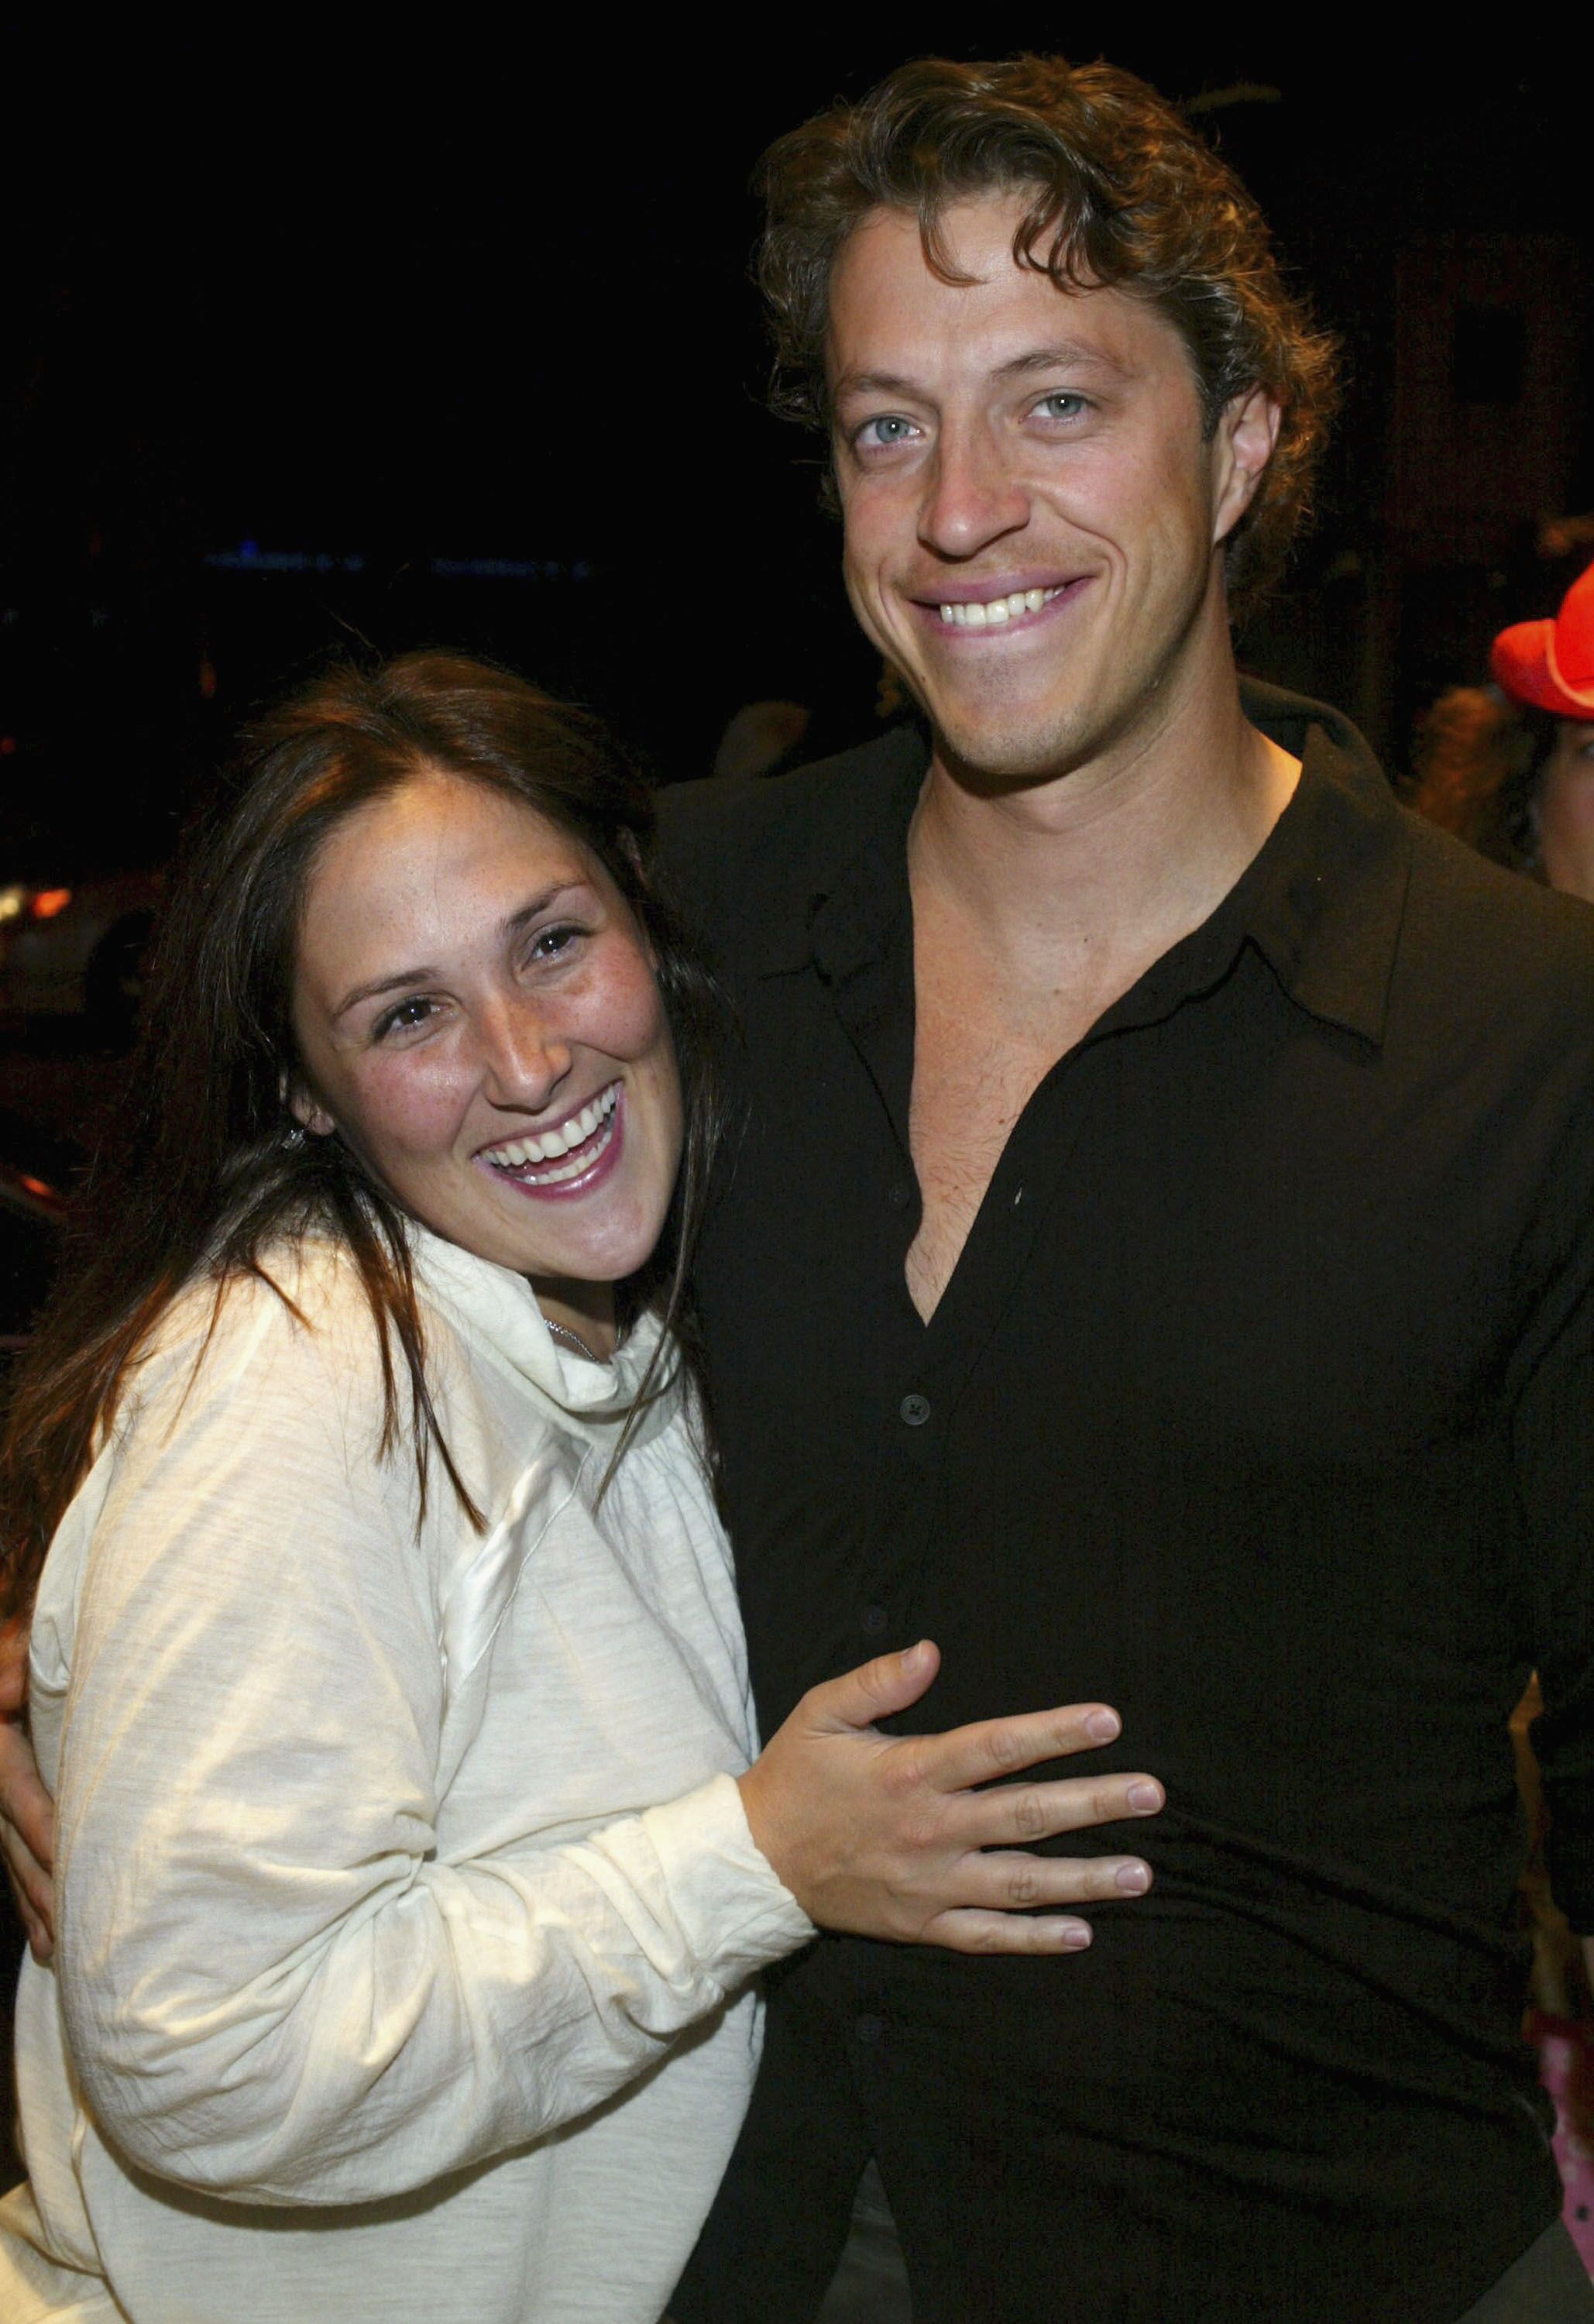 Ricki Lake and Rob Sussman arrive to the "Painted Turtle Camp" Bingo Benefit at The Roxy Theatre on February 16, 2005 in Los Angeles, California. The event featured a Celebrity Bingo Game and Auction to benefit the "Painted Turtle Camp" for children. | Source: Getty Images